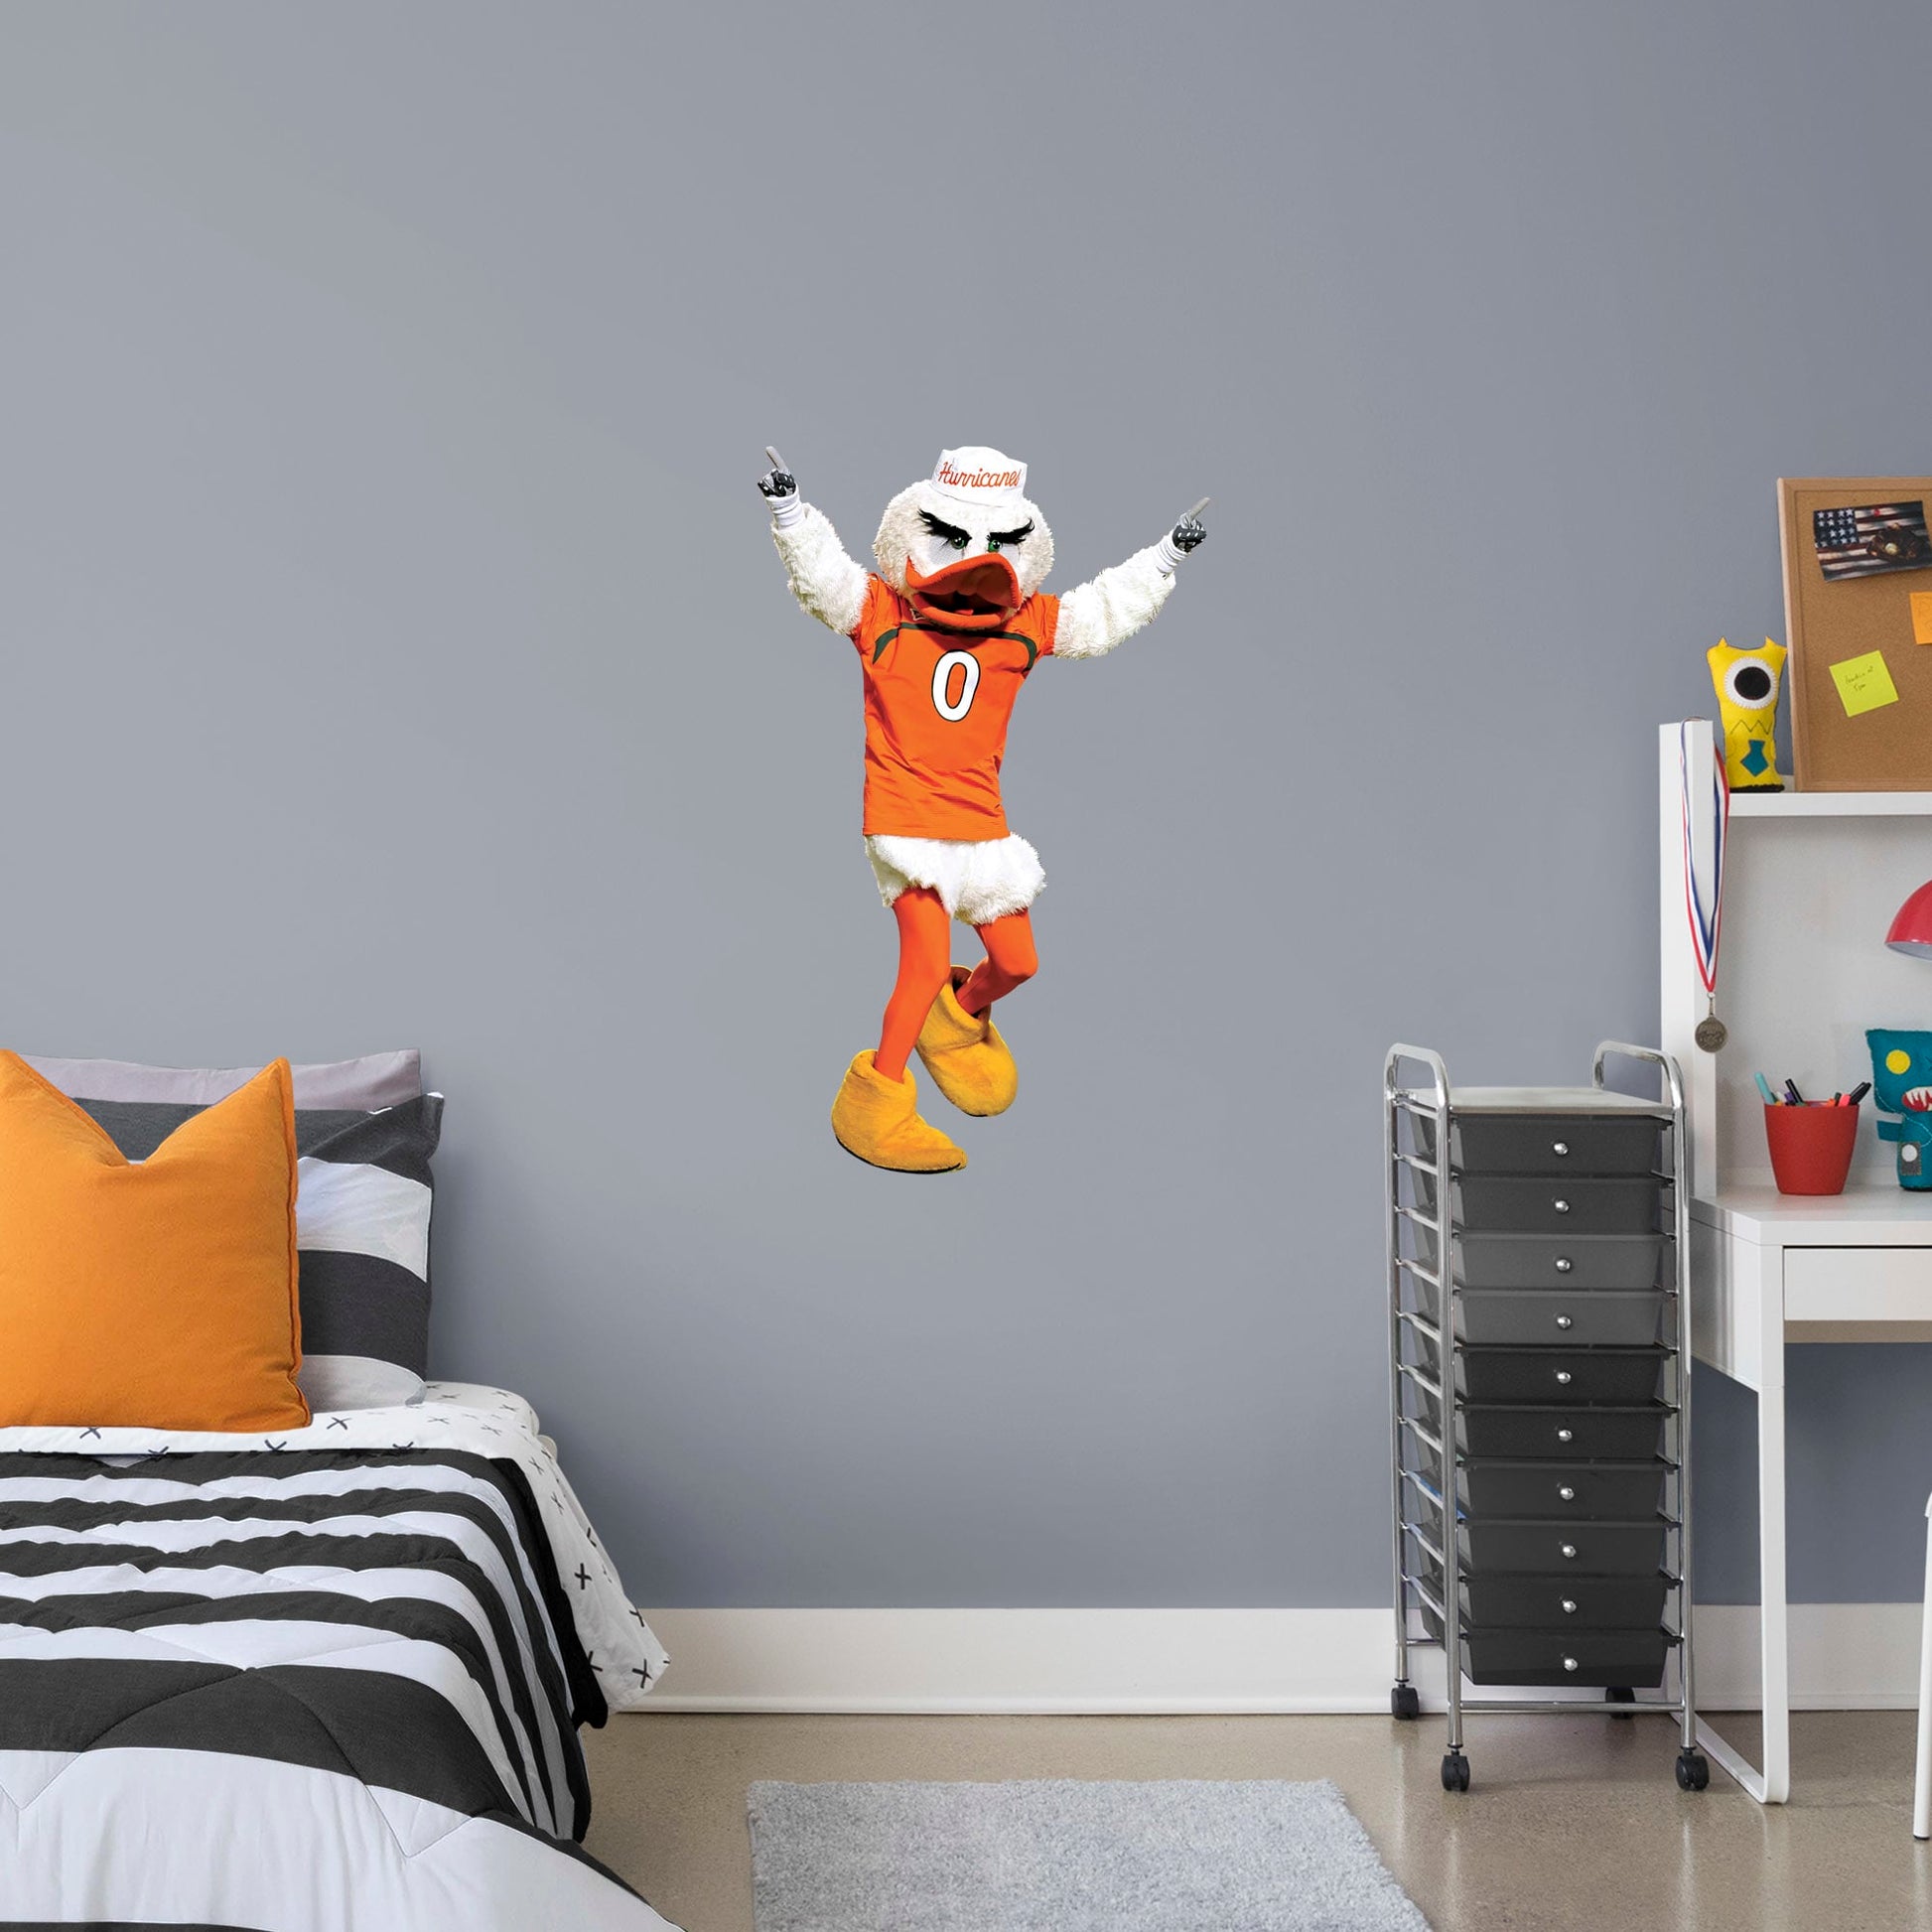 Life-Size Mascot + 2 Decals (49"W x 78"H)